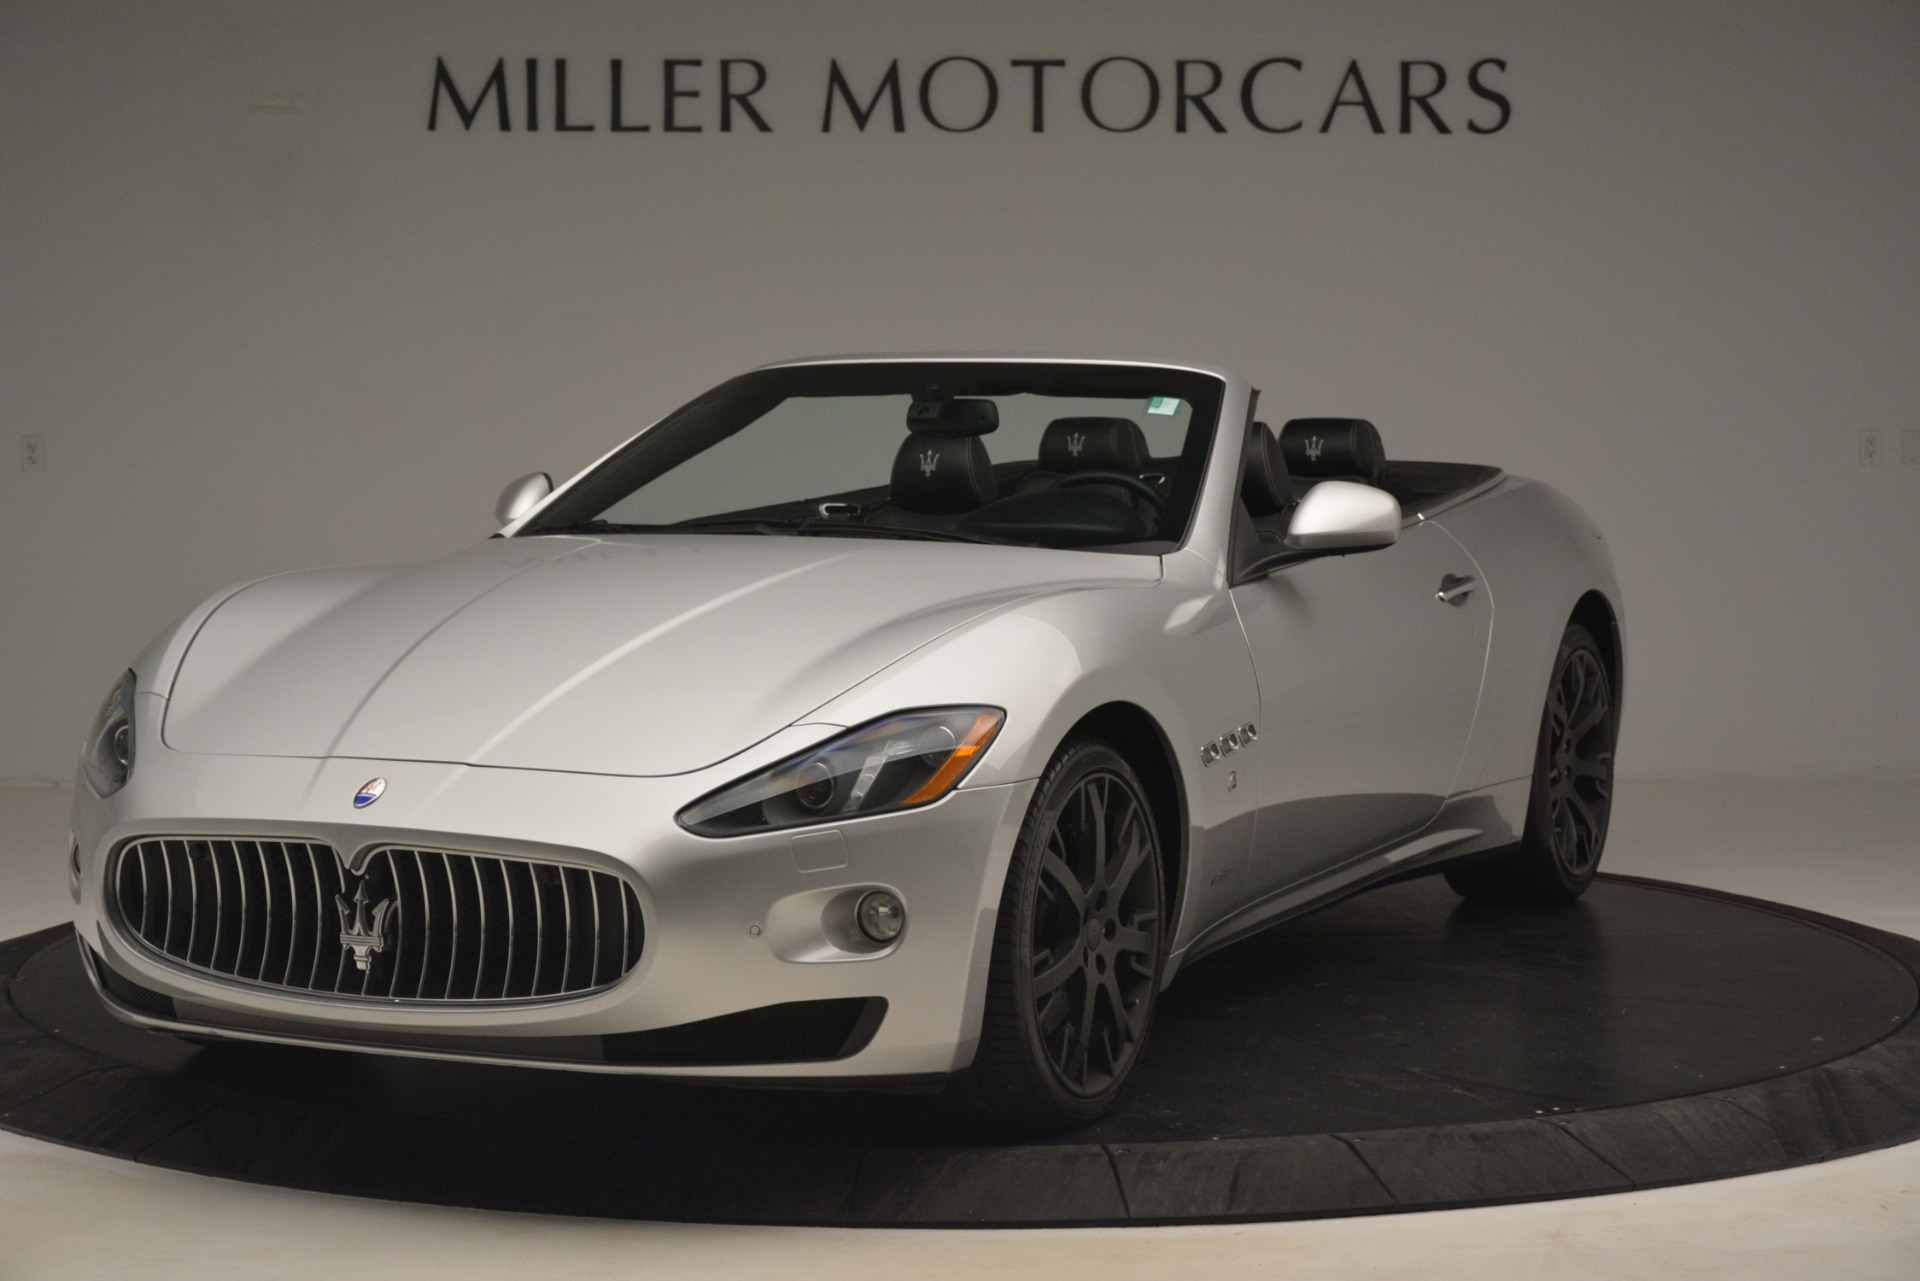 Used 2016 Maserati GranTurismo for sale Sold at Bentley Greenwich in Greenwich CT 06830 1